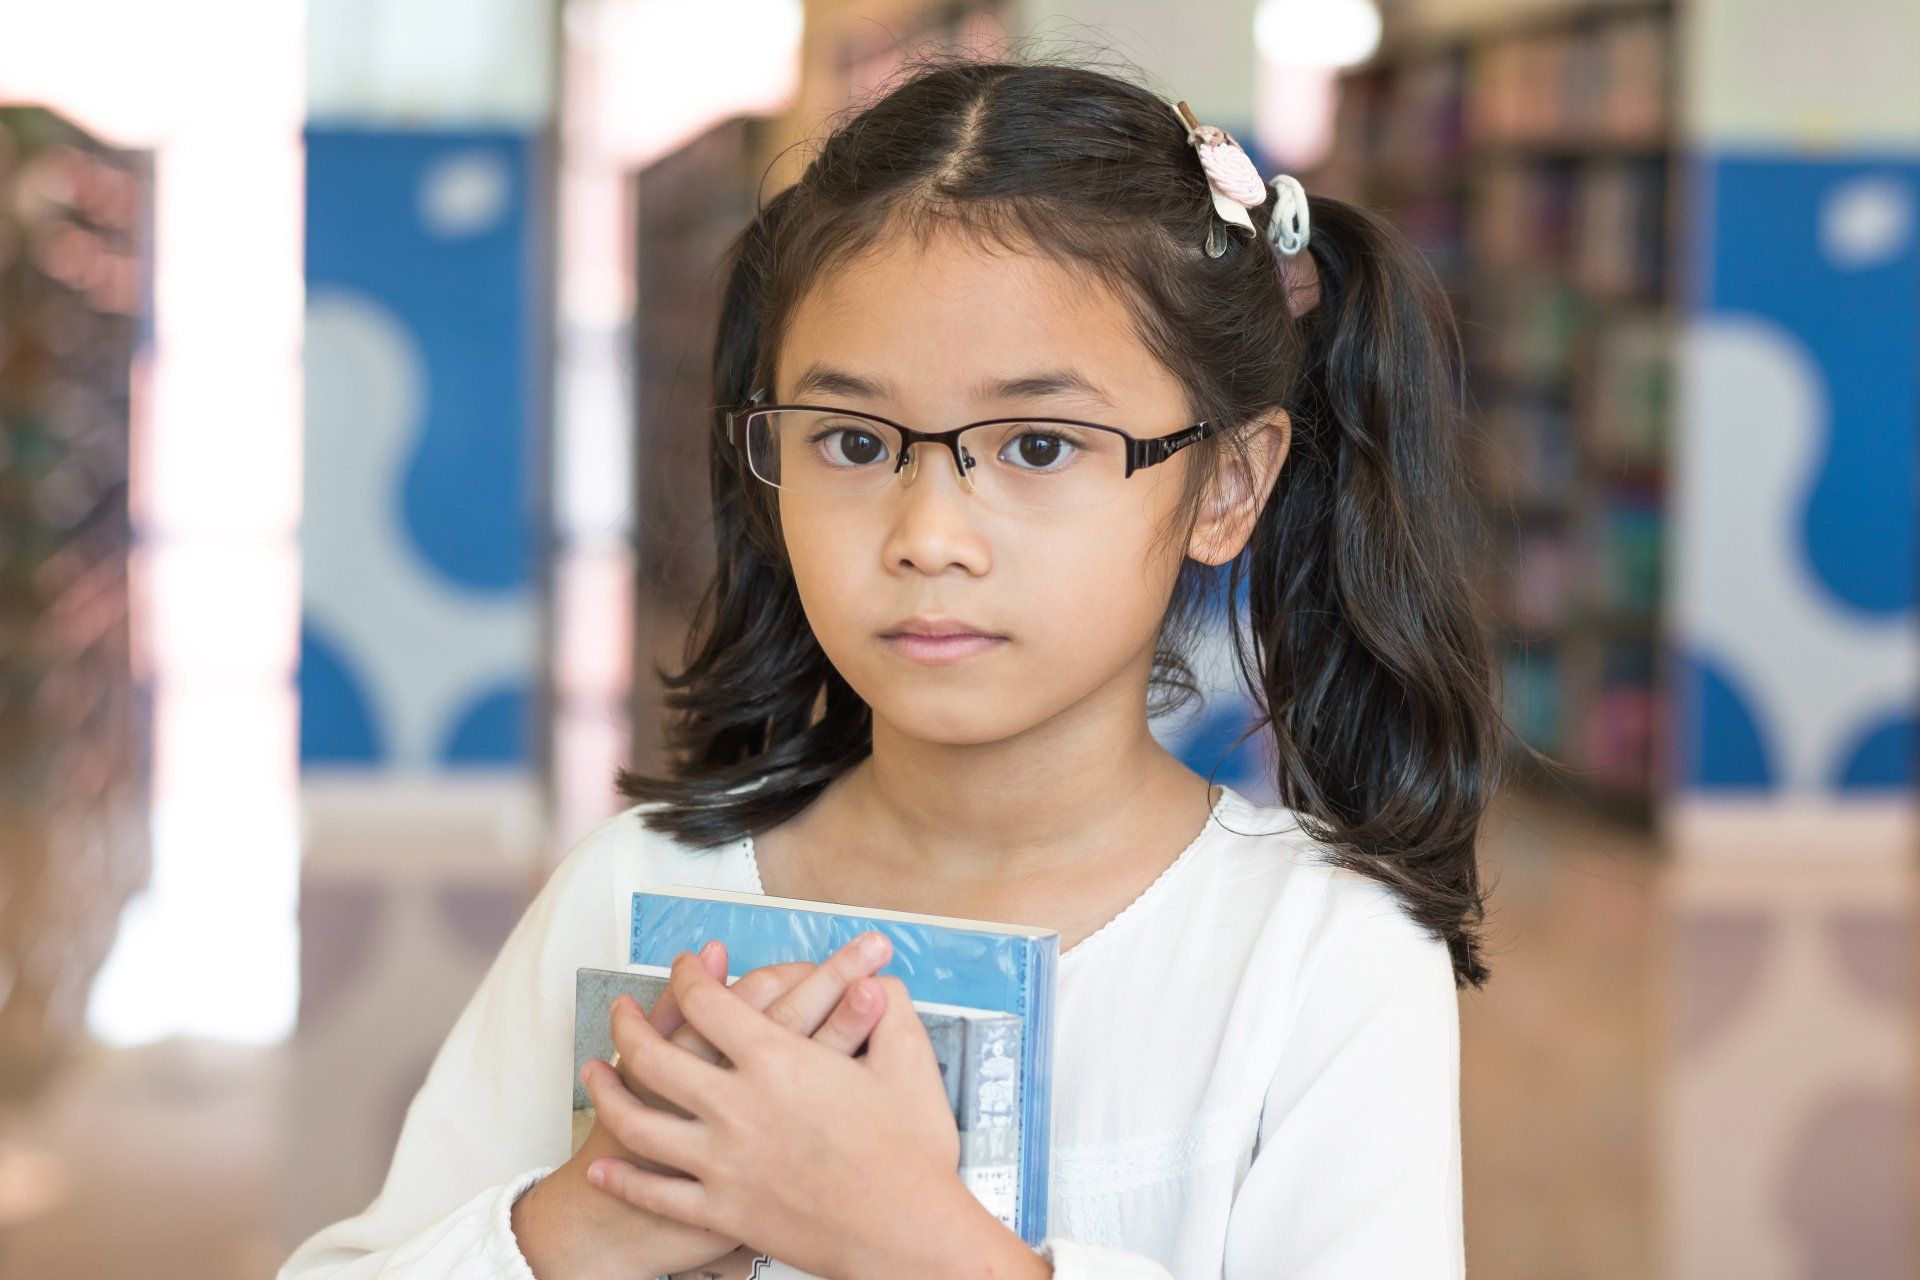 little girl holding books in the library